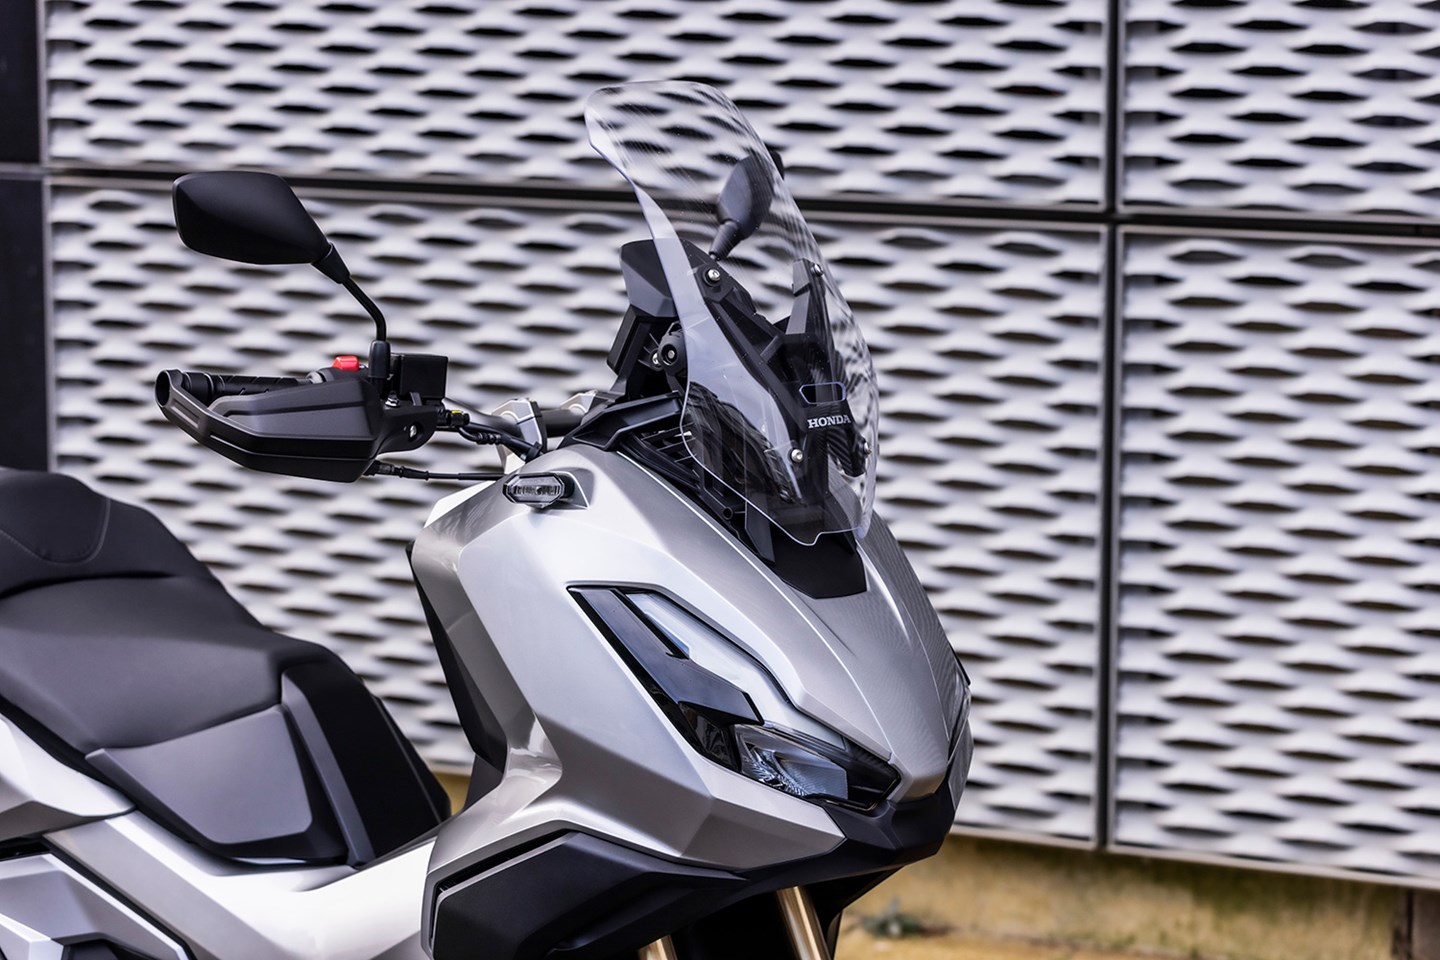 Honda Adv350 Review: All You Need To Know 